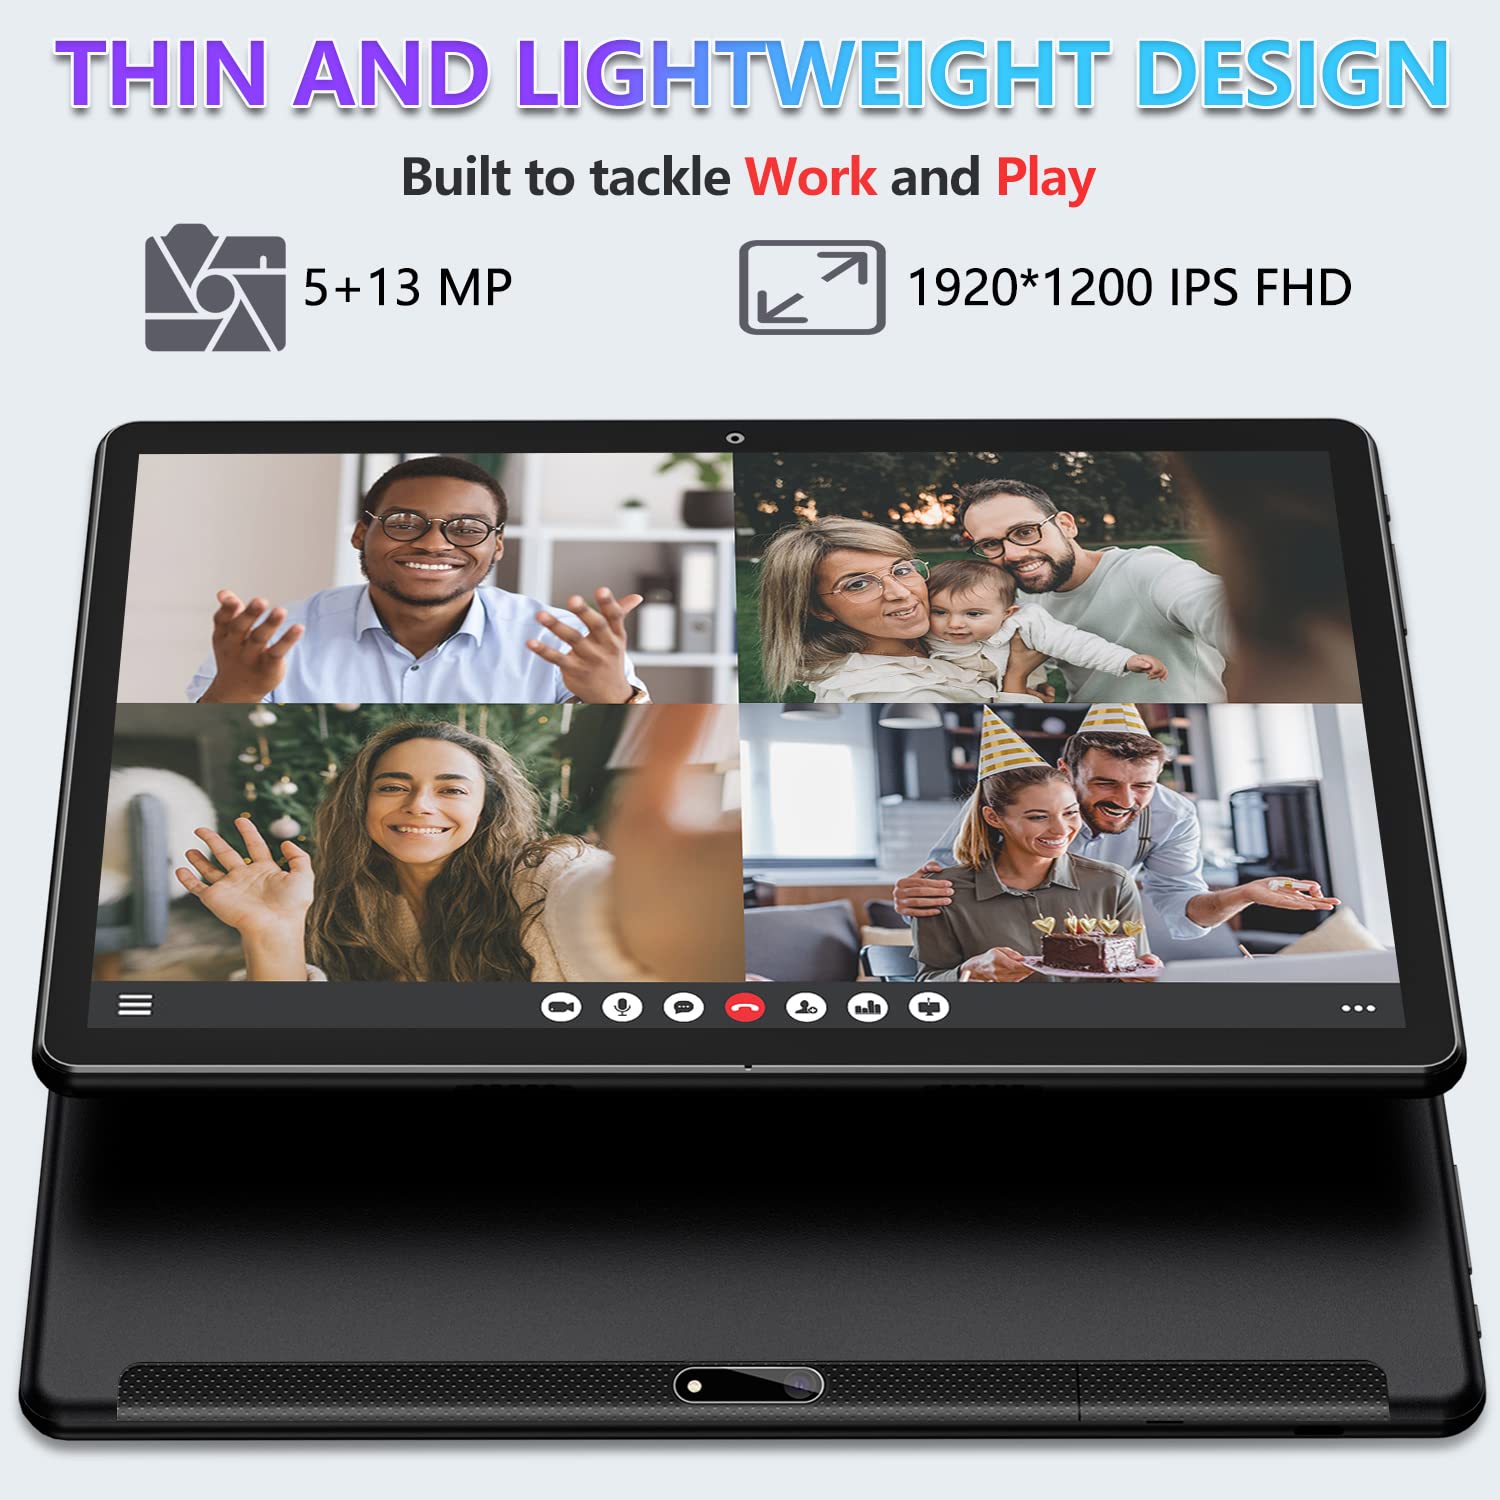 𝟮𝟬𝟮𝟒 𝗟𝐚𝐭𝐞𝐬𝐭 Tablet 10.1" Octa-Core Android 11 Tablet, 64GB Storage Tablet with Keyboard, Stylus Pen, Dual 13MP+5MP Camera, WiFi, Bluetooth, GPS, 512GB Expand Support, IPS Full HD Display